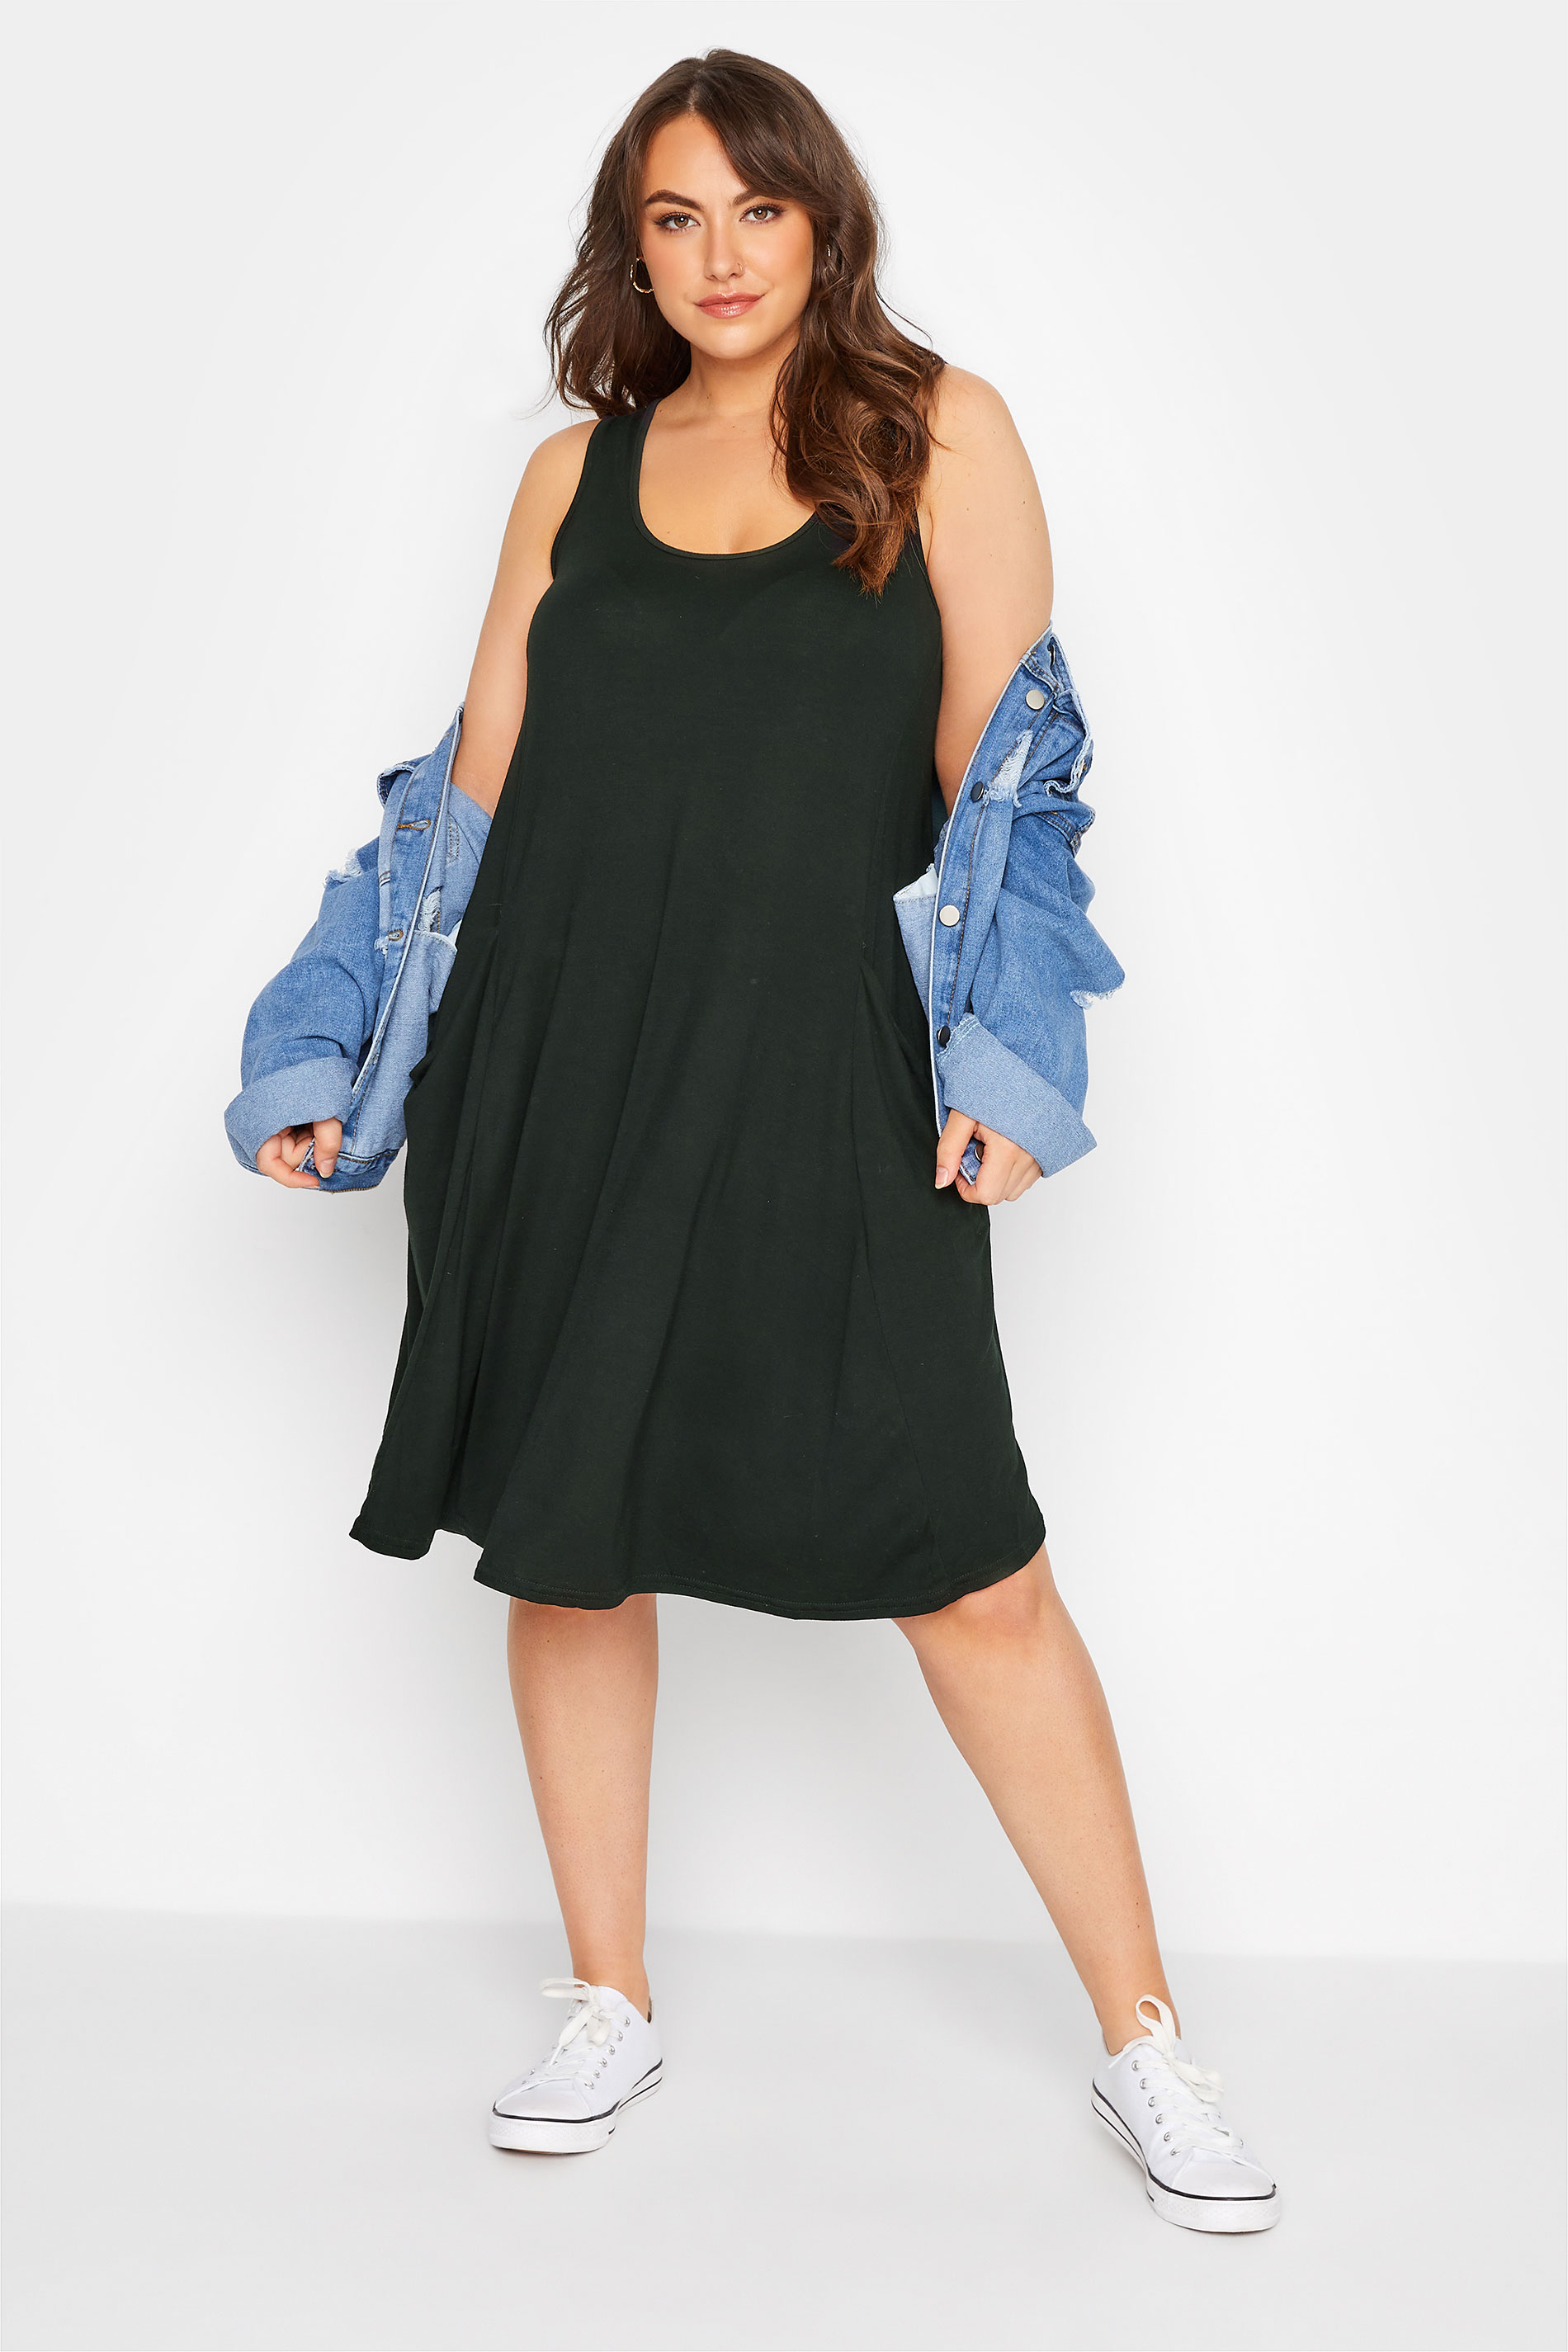 Robes Grande Taille Grande taille  Robes en Jersey | Robe Noire Sans Manches à Poches - WO94419